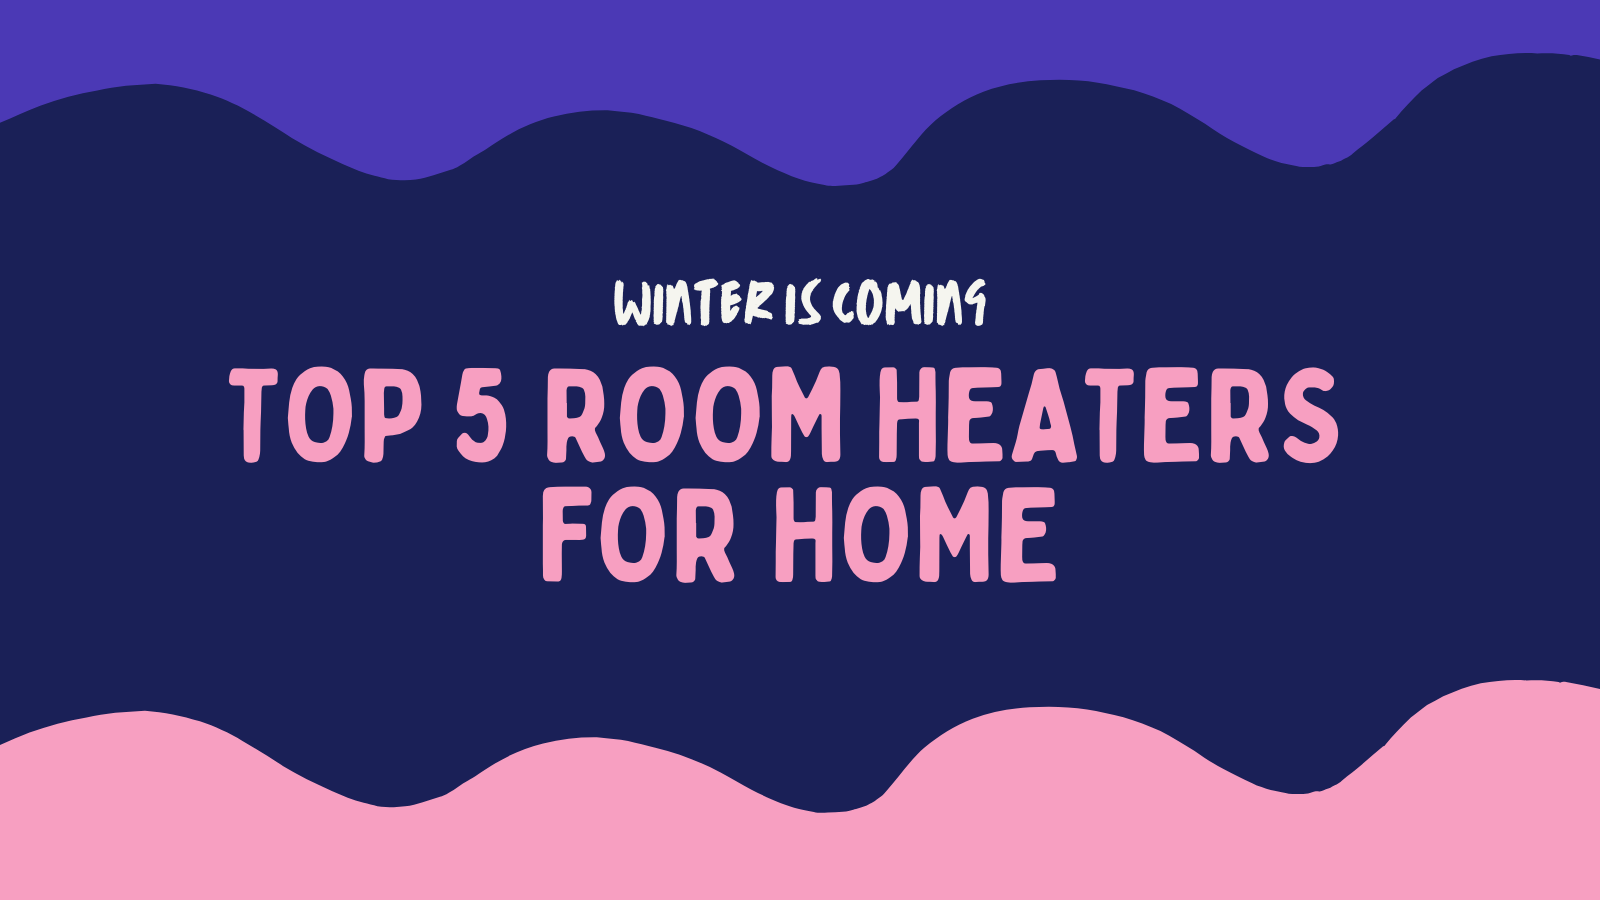 5 best room heaters for home on Amazon